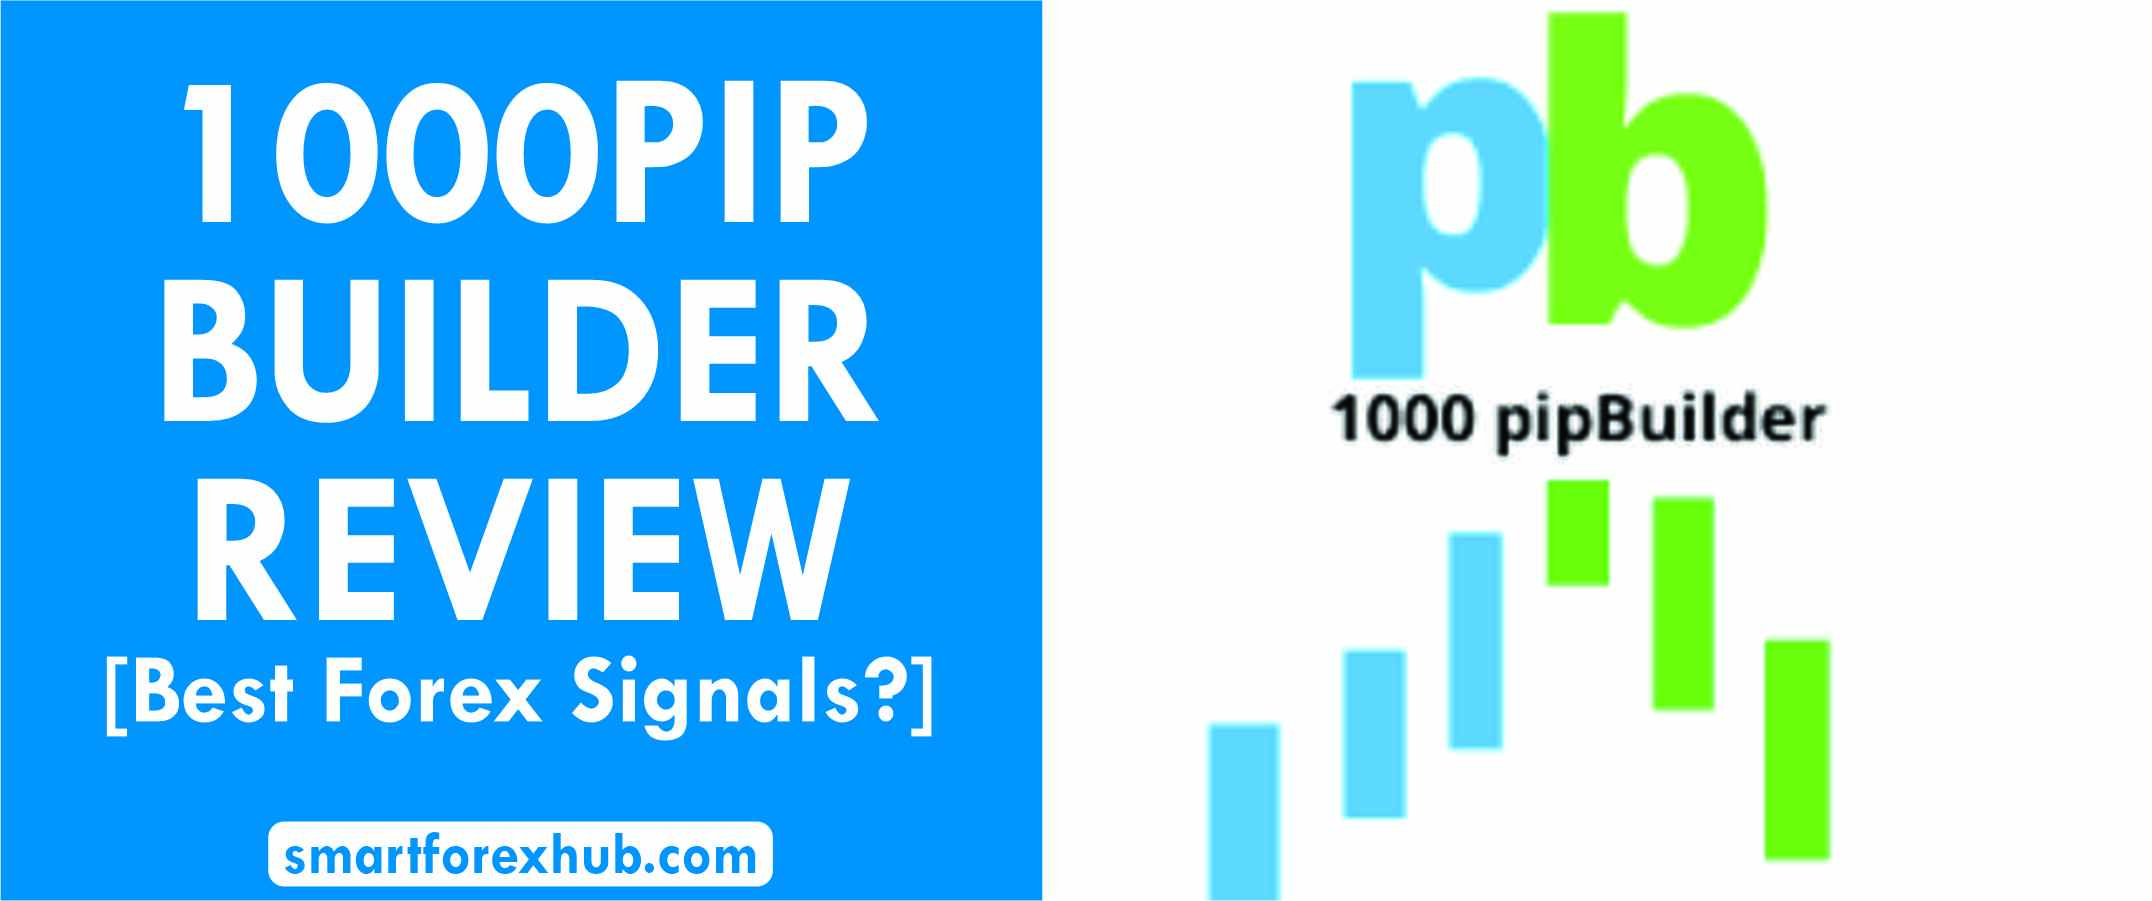 1000PIP Builder Review featured image